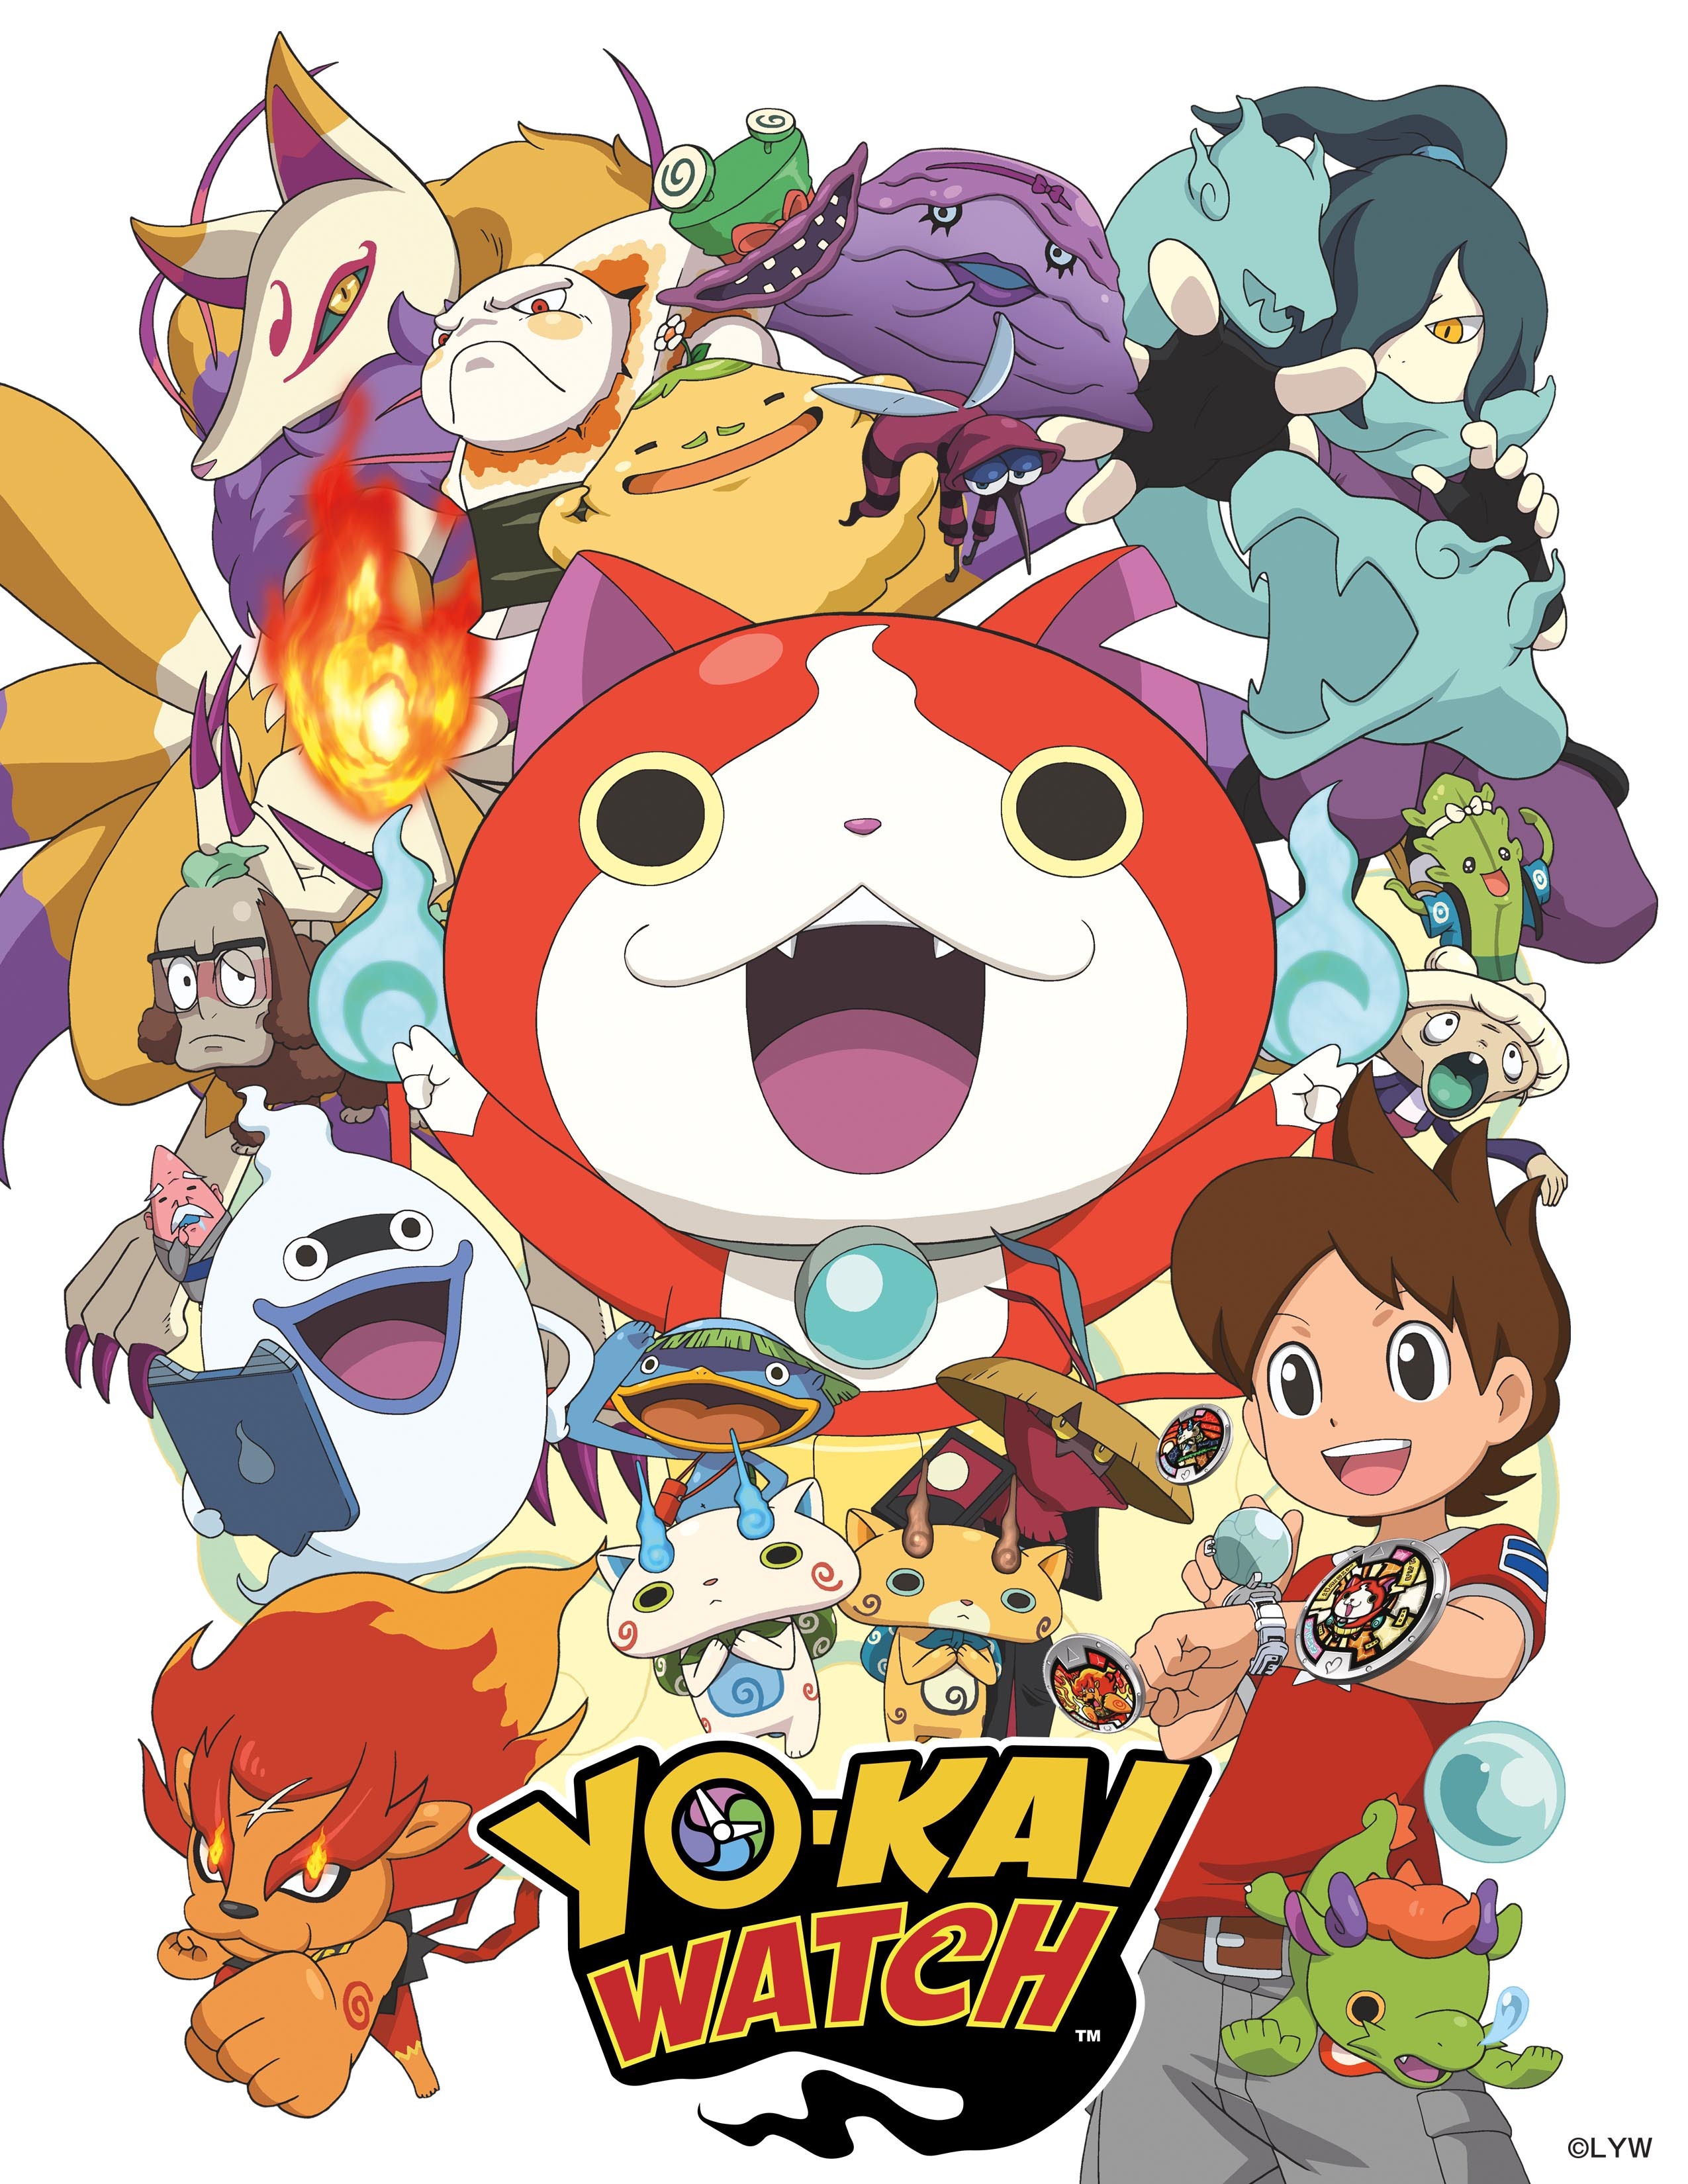 Level-5 reconfirms that a new Yo-Kai Watch game is in the works